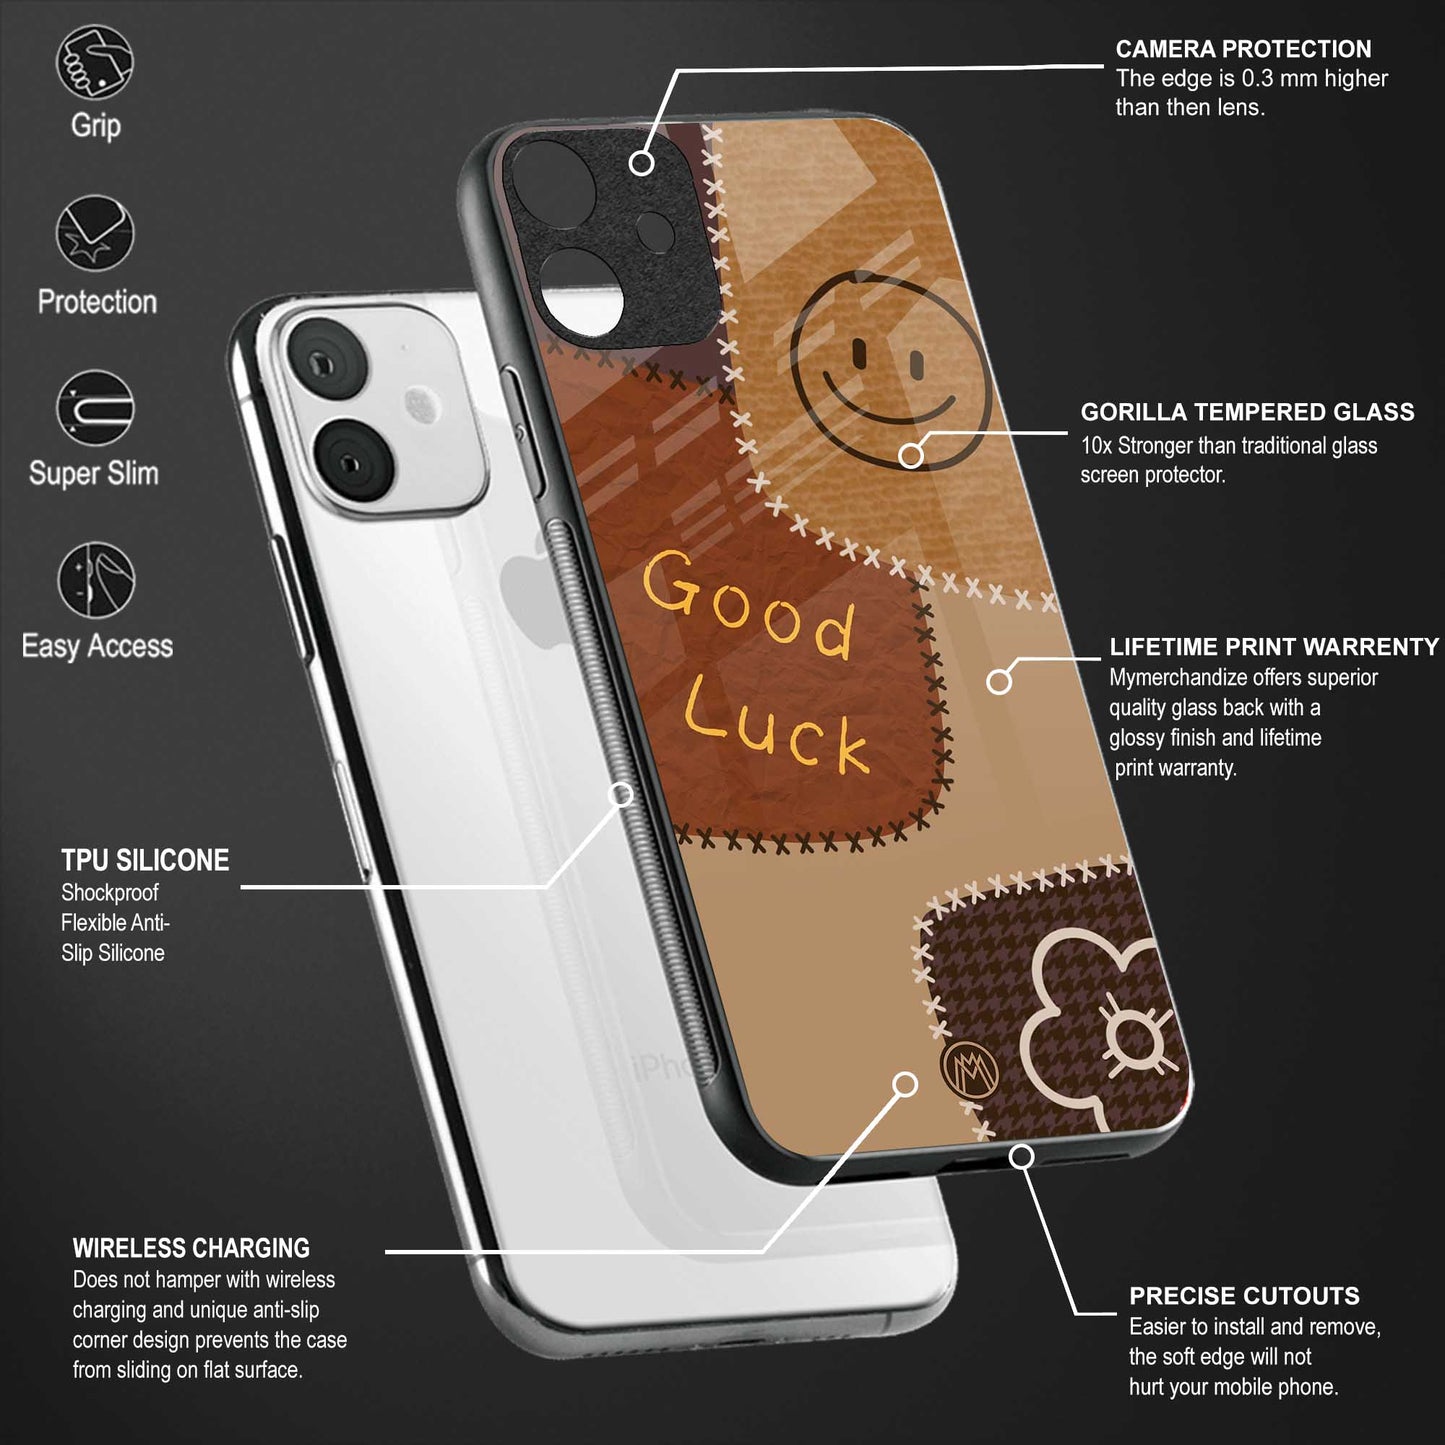 good luck back phone cover | glass case for oneplus nord ce 2 lite 5g